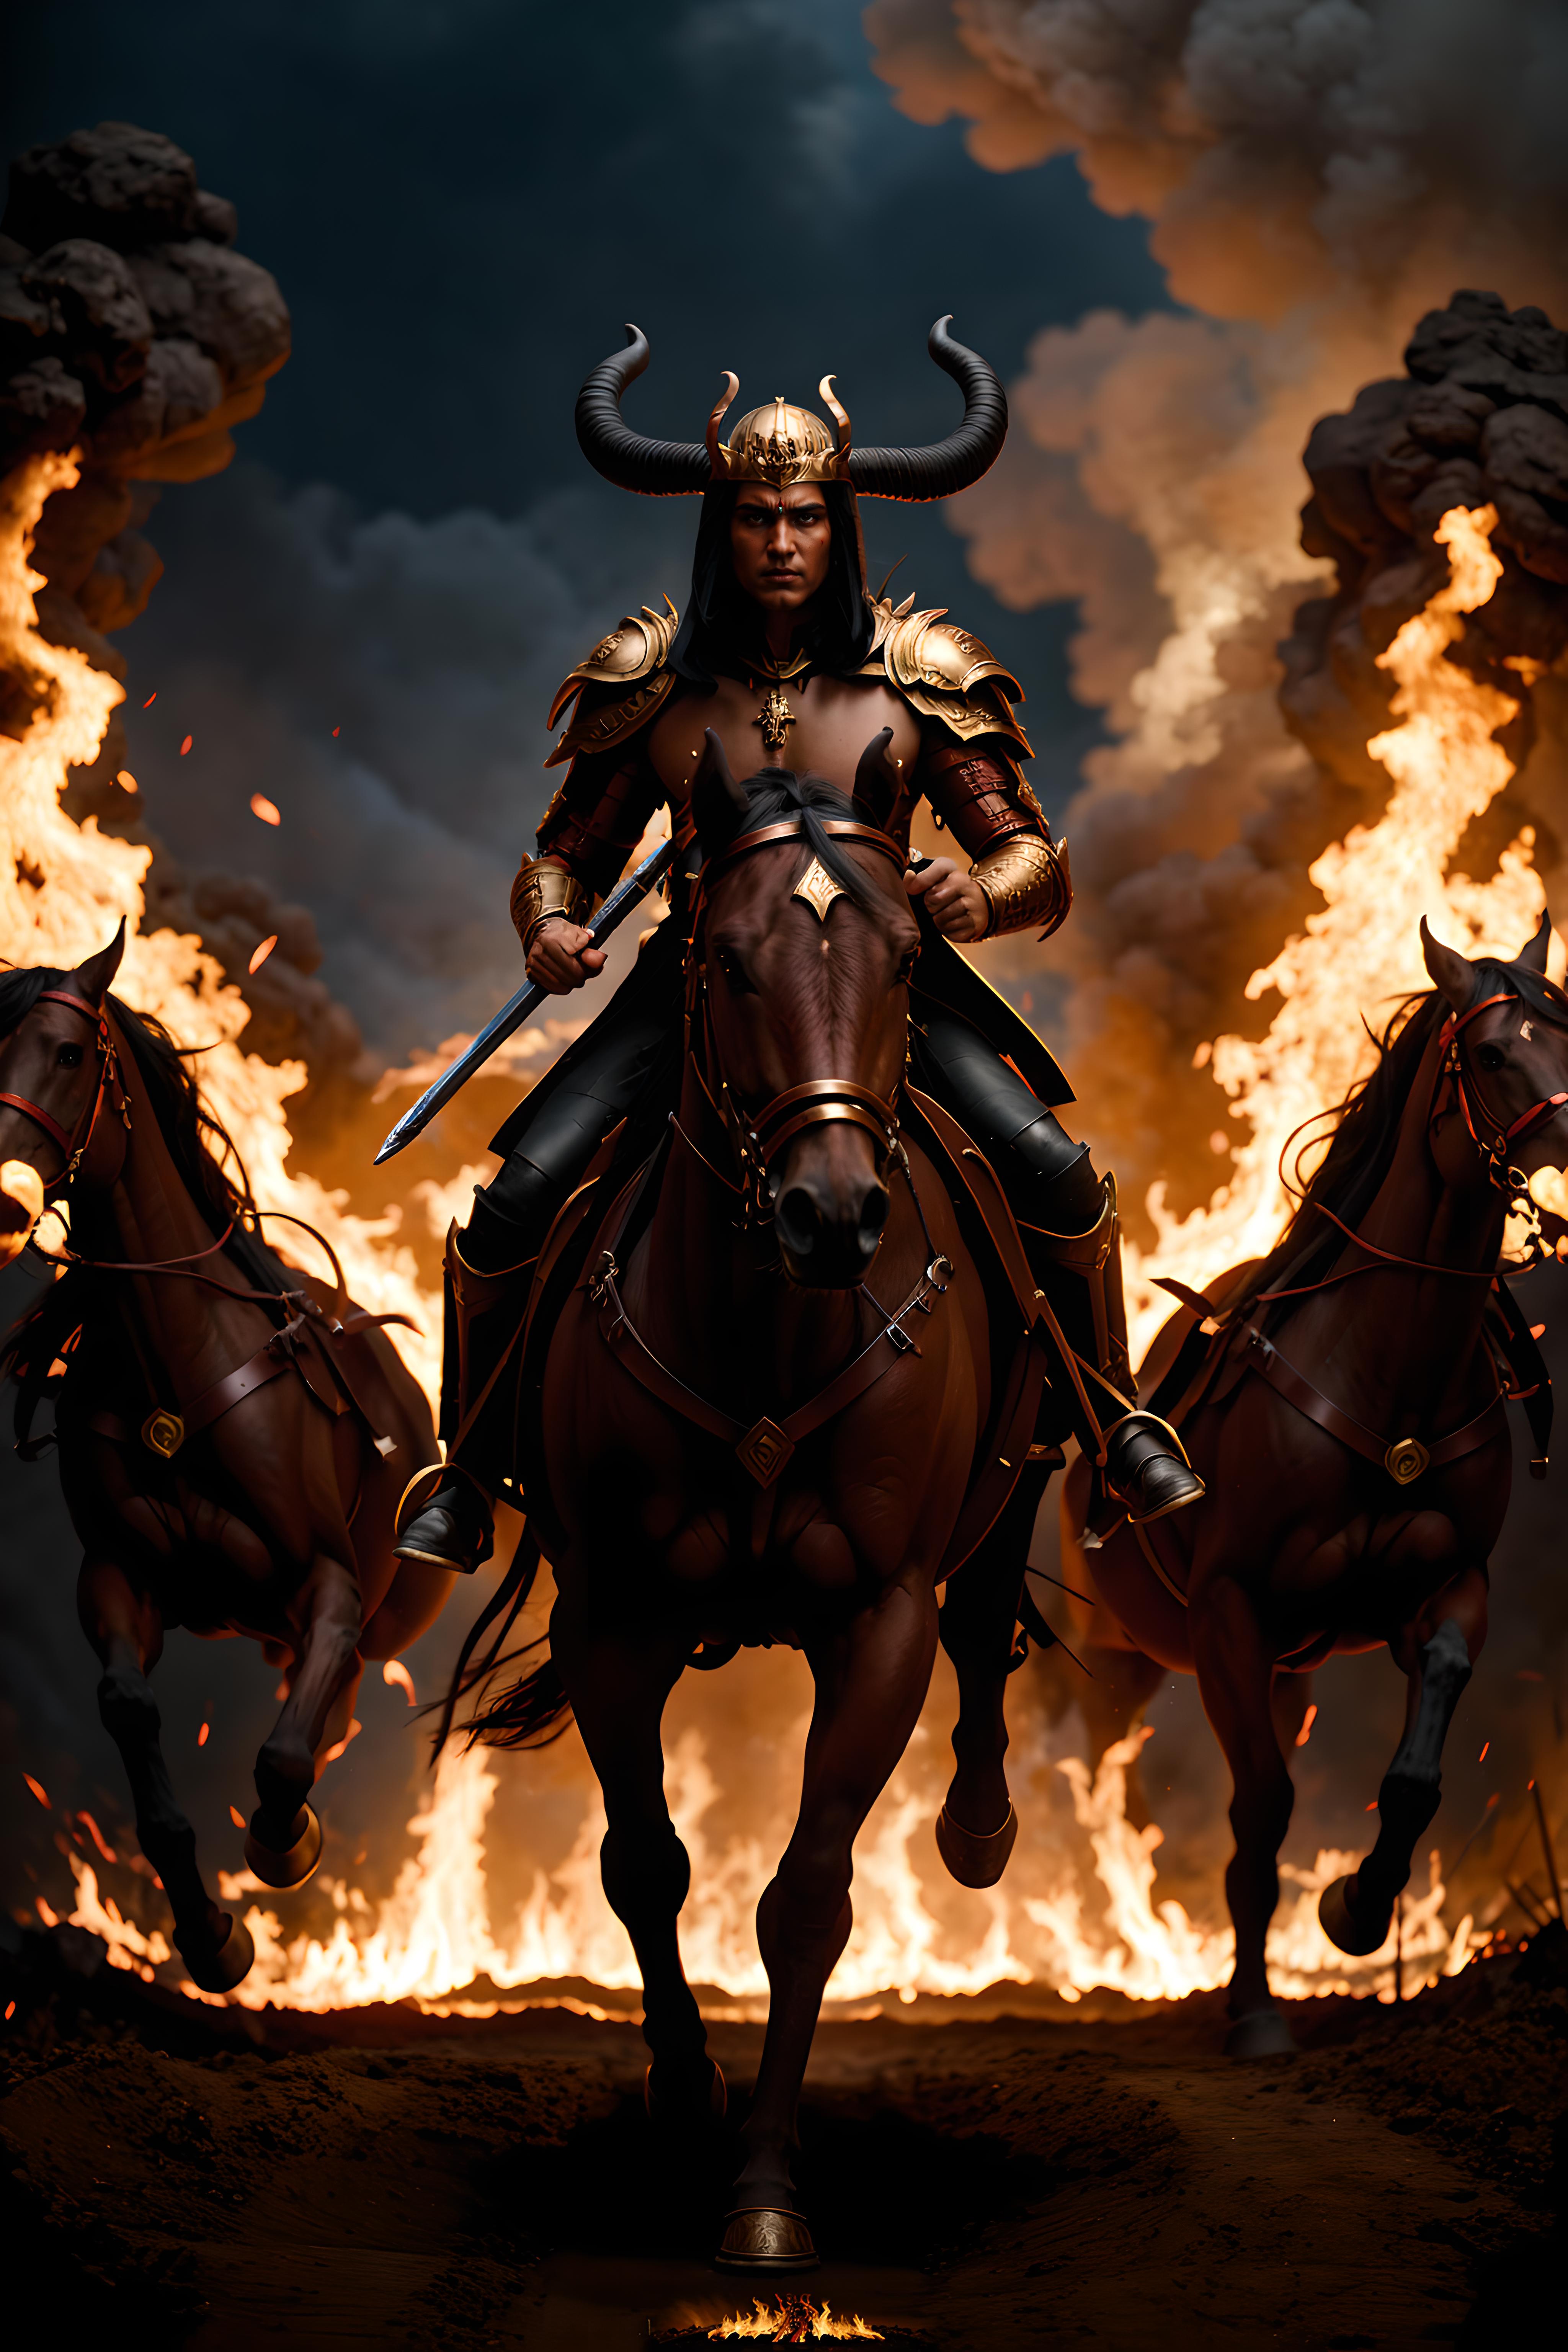 A Warrior Riding a Brown Horse with Fire in the Background